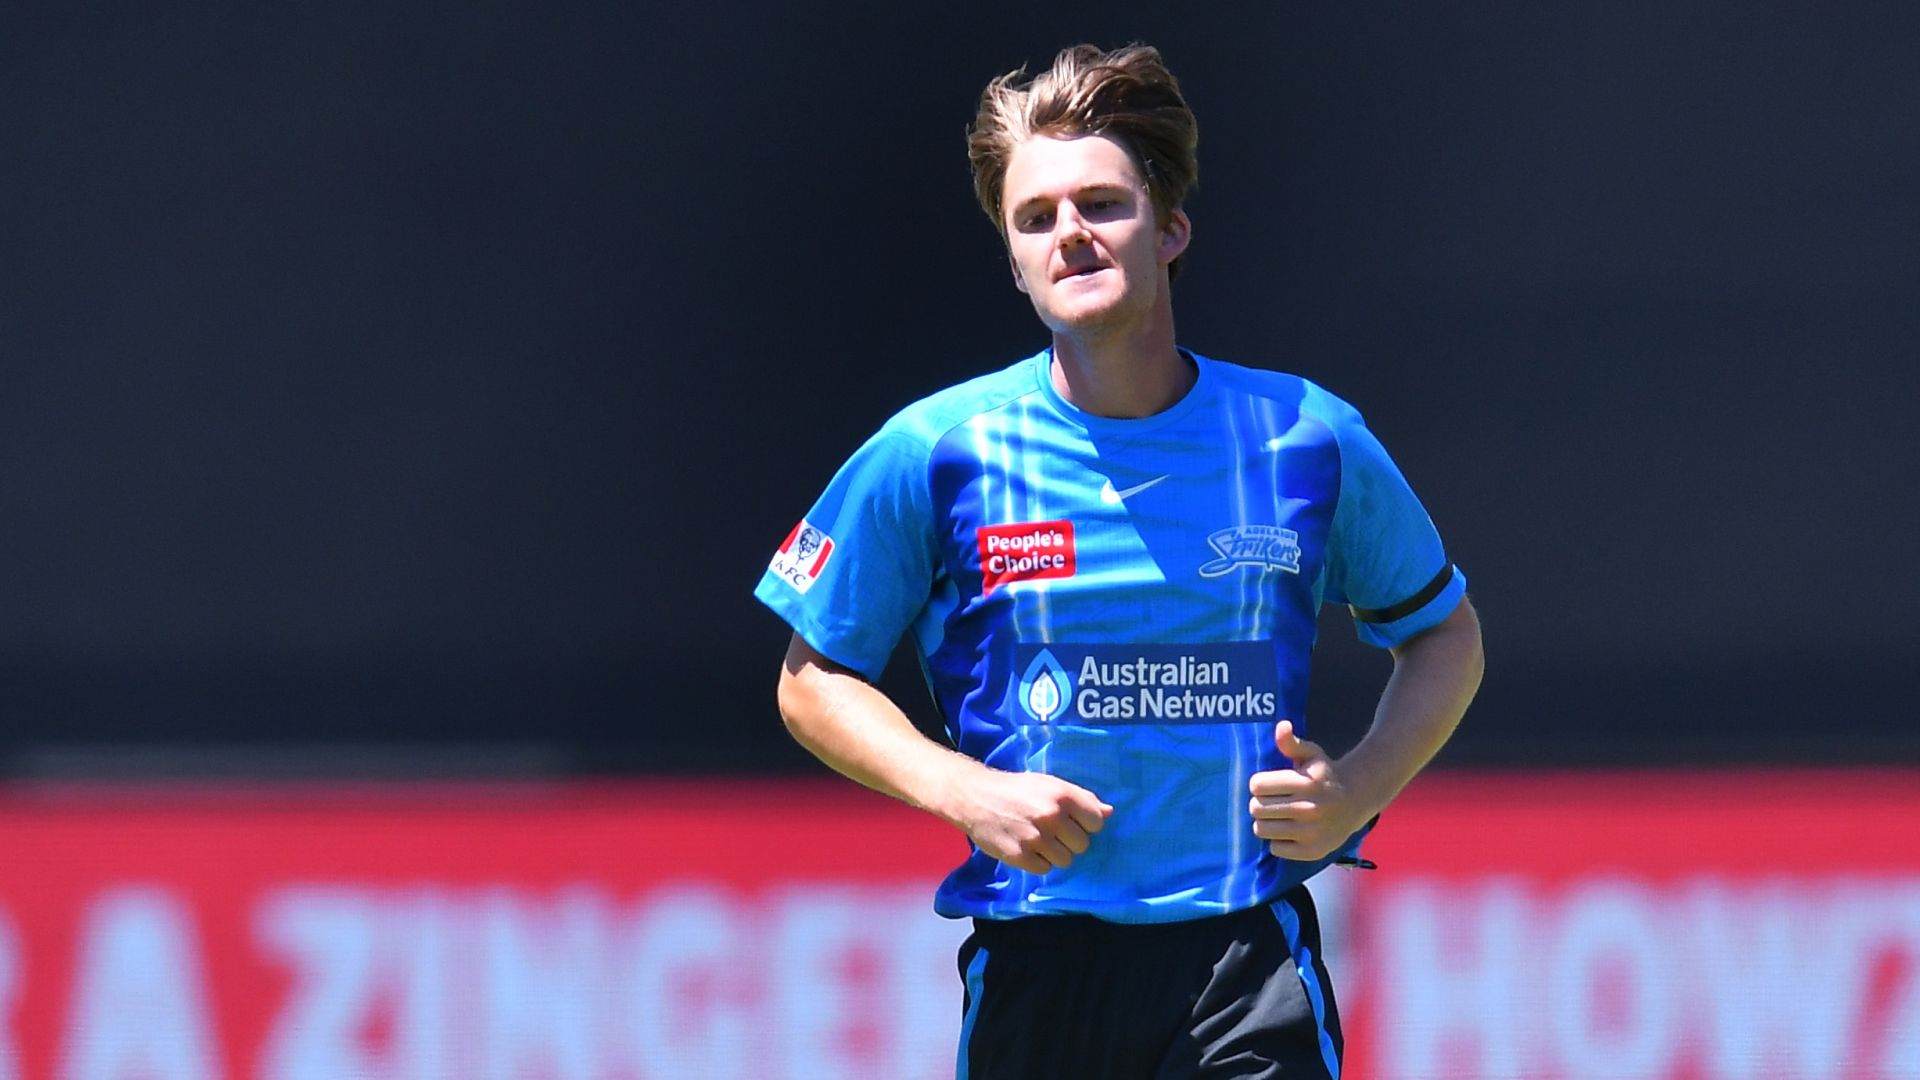 BBL 11 | Youngster Thornton, experienced Wells combine to down Stars and keep Strikers in hunt